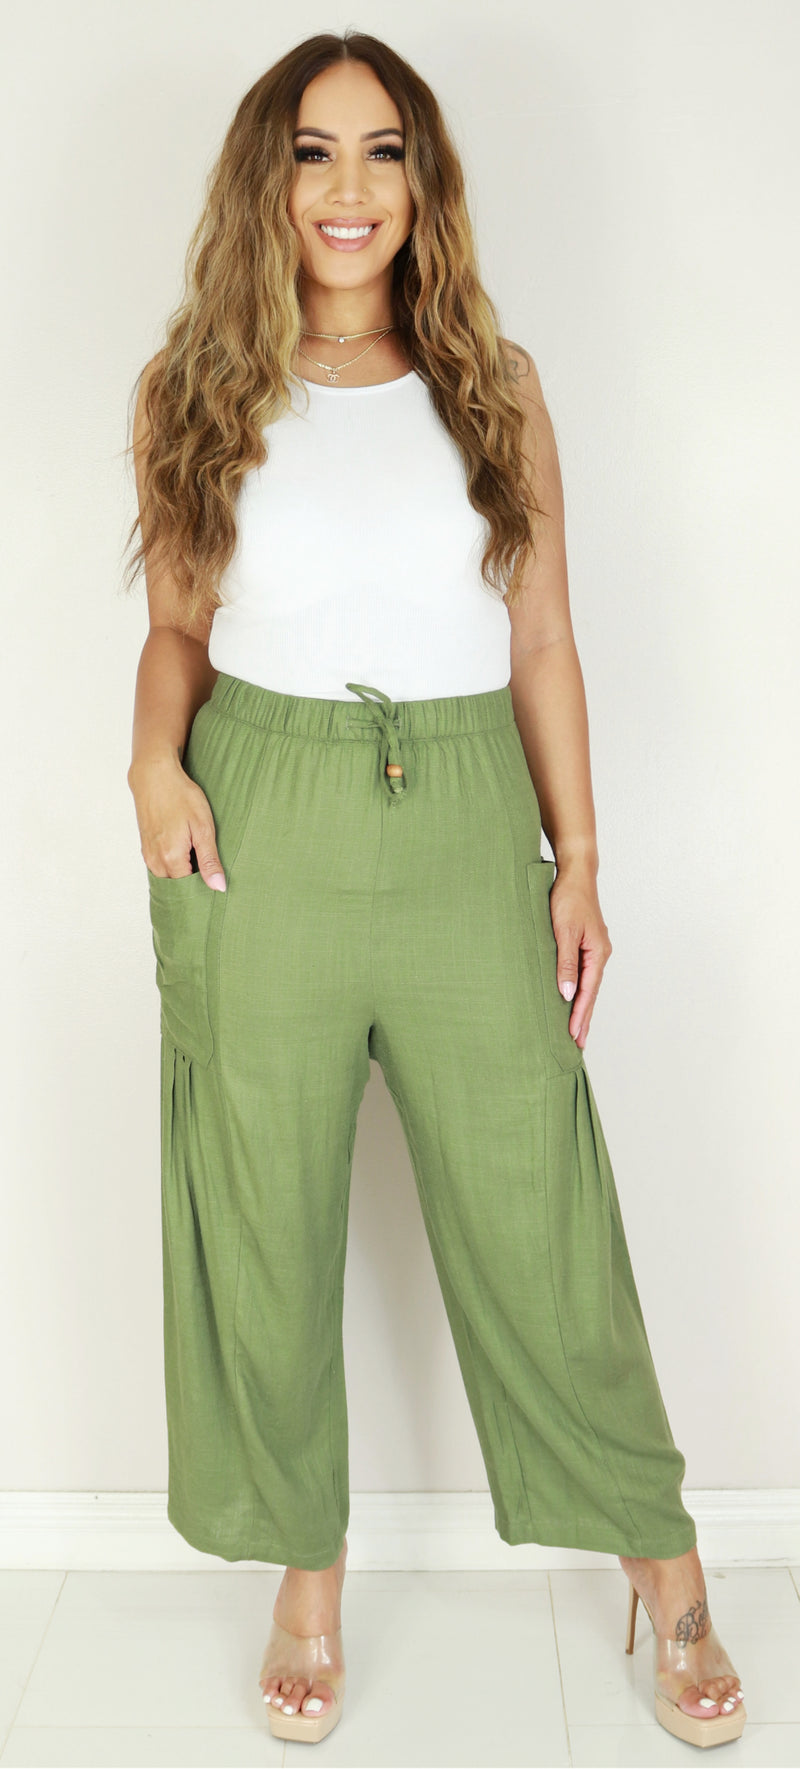 Jeans Warehouse Hawaii - SOLID WOVEN PANTS - BALLOON POCKET WIDE LEG PANTS | By VERY J